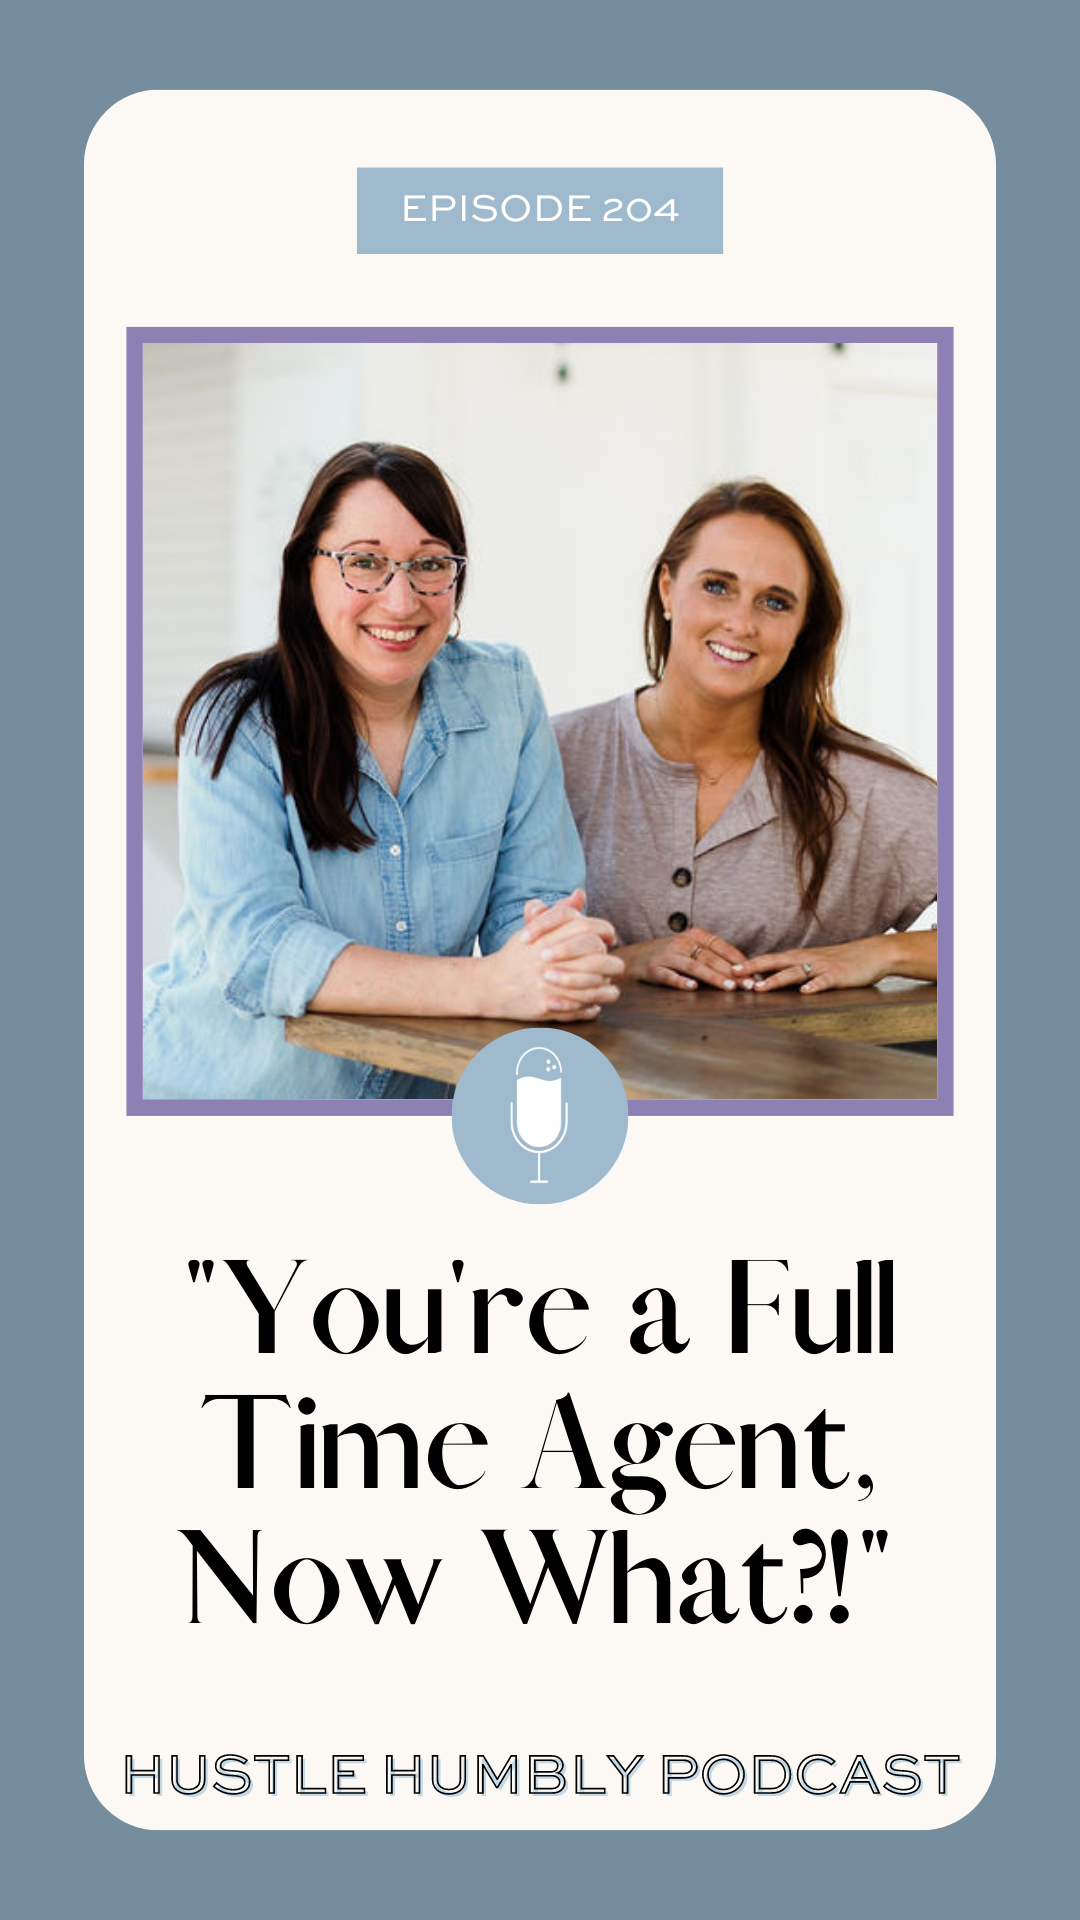 Hustle Humbly Episode 204: You're a Full Time Agent, Now What?!